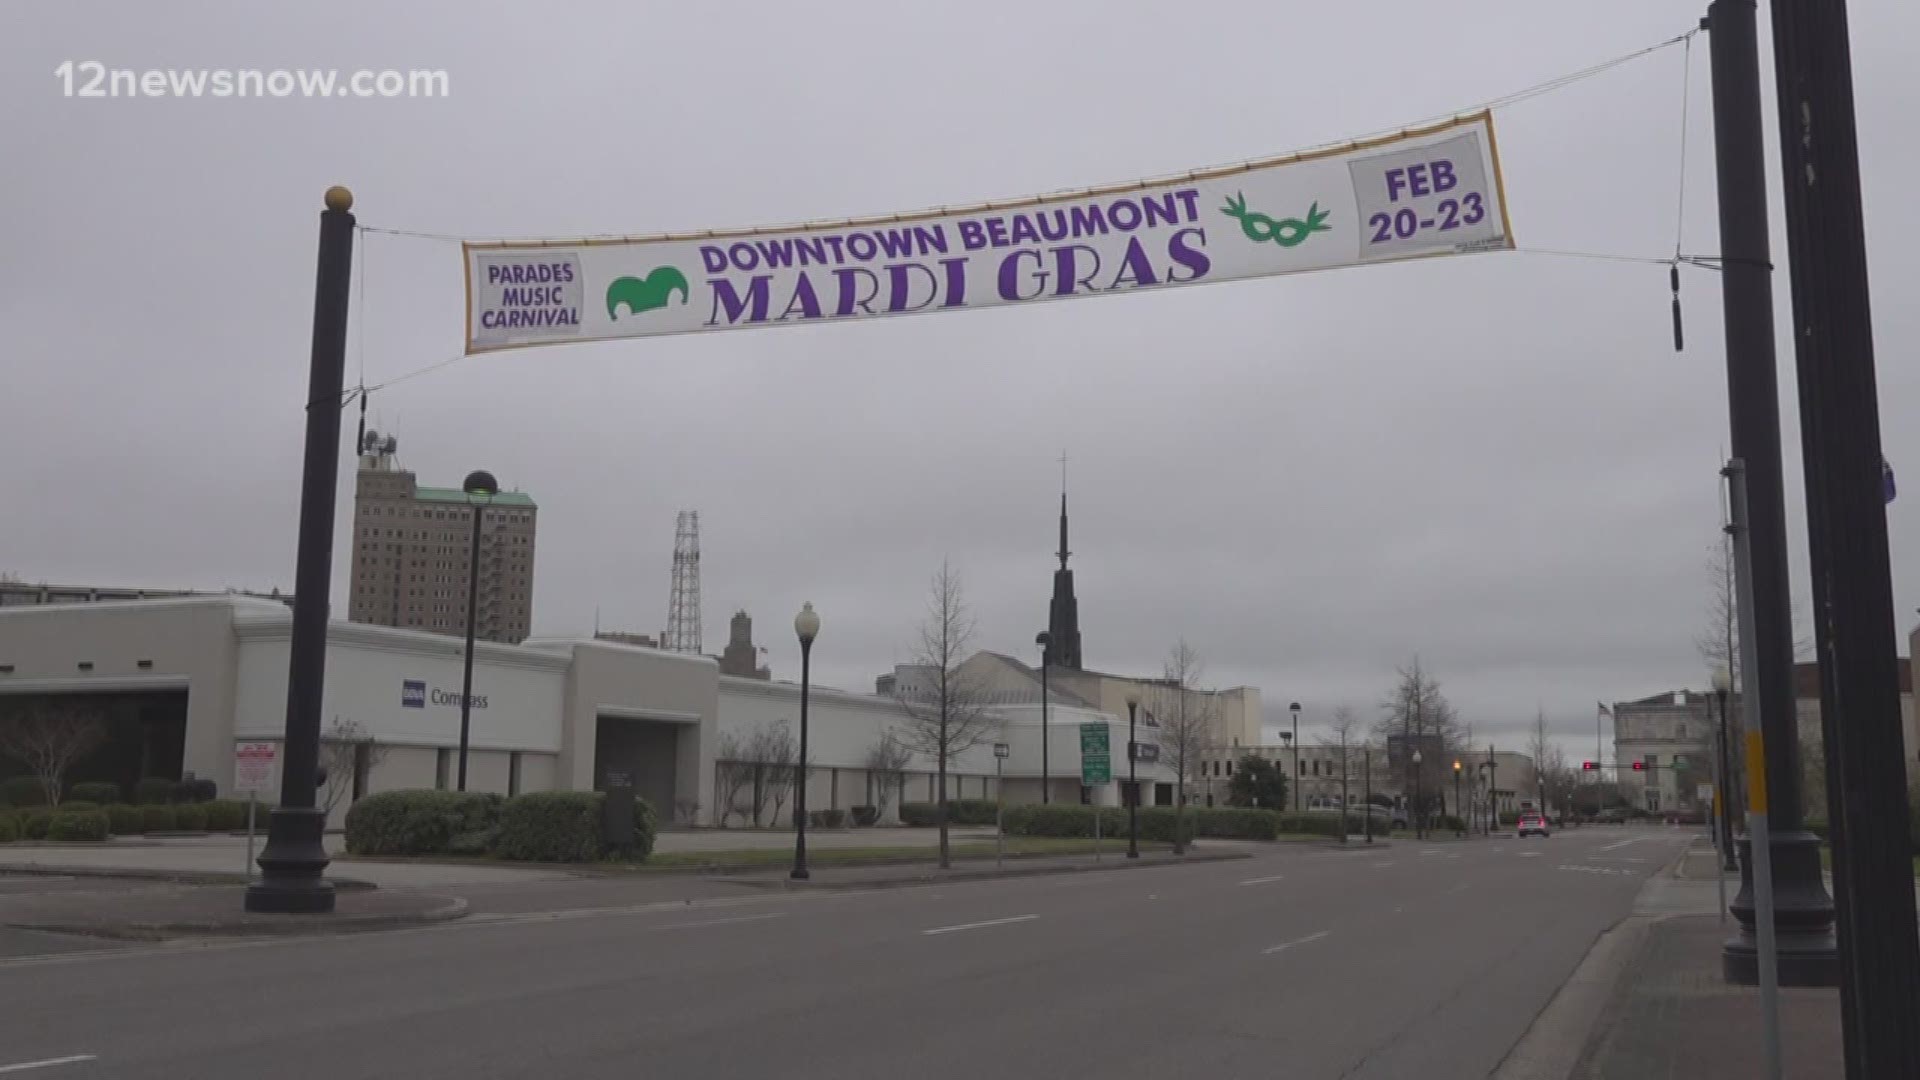 Mardi Gras officially kicks off Thursday evening in downtown Beaumont, and folks across southeast Texas are gearing up for the big event.